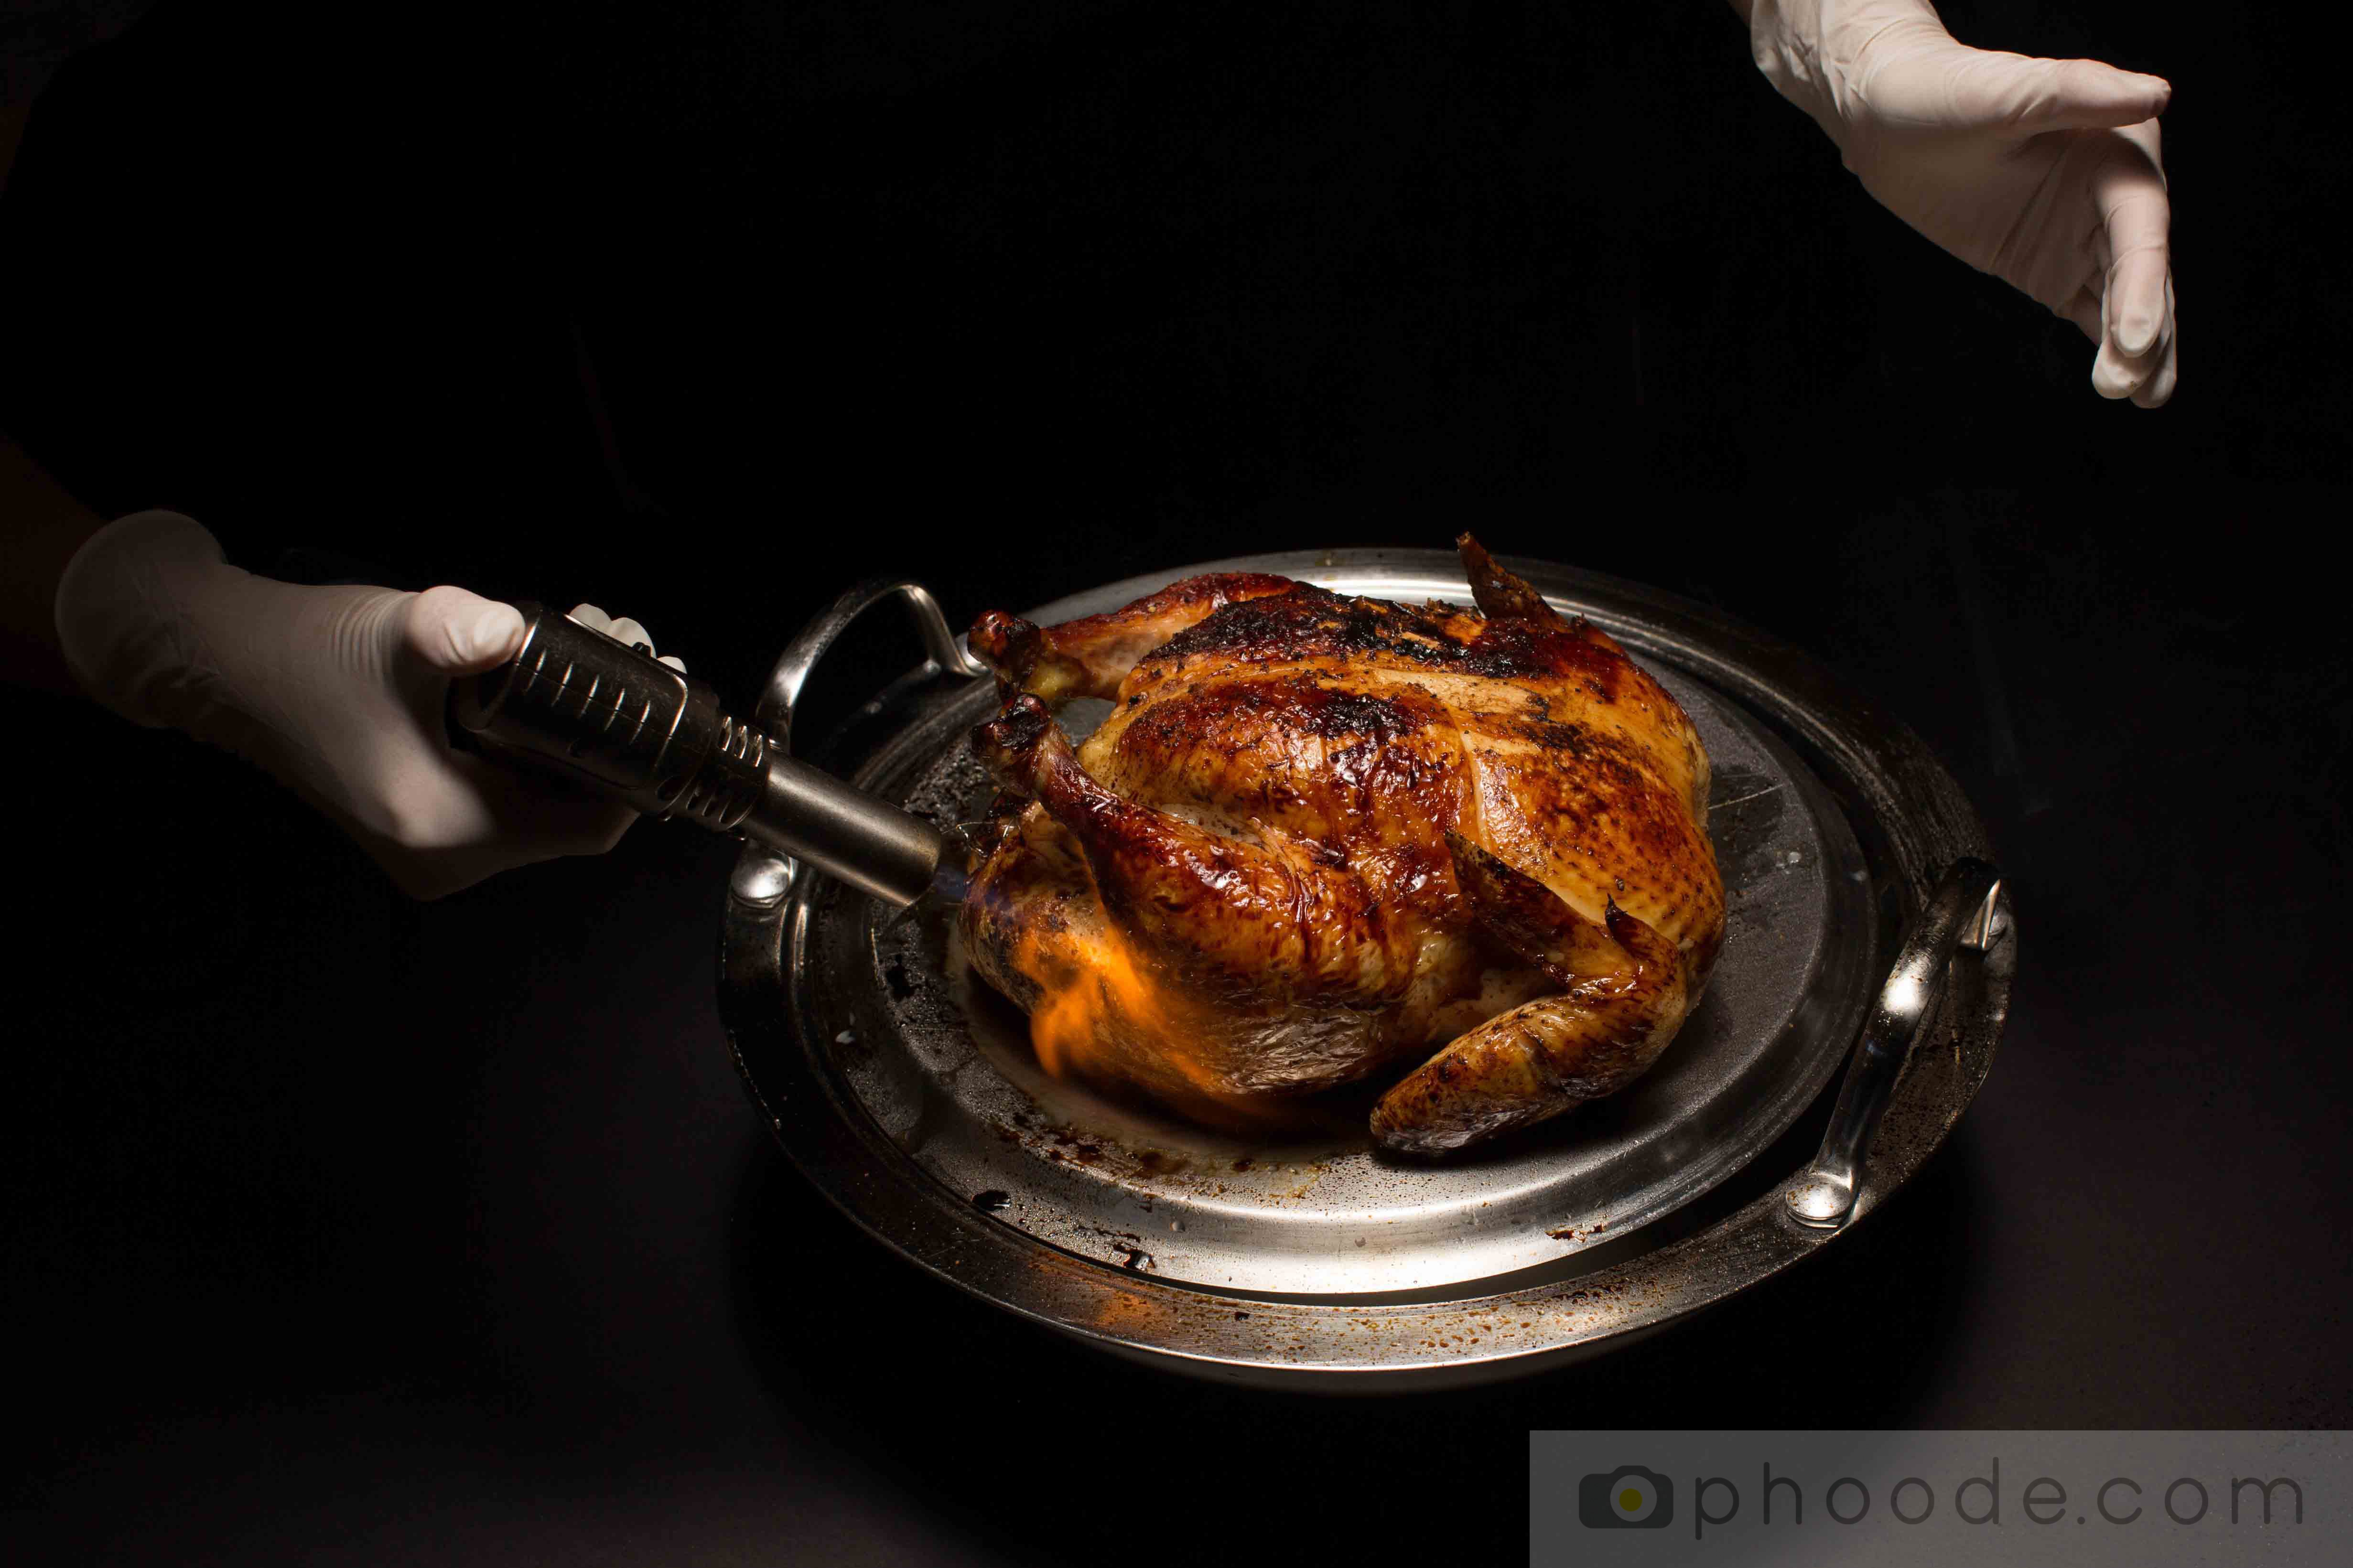 culinary torch for food styling; butane torch food styling; fake roasted chicken; faux roasted chicken; food stylists network; food stylists platform; food stylists website; food stylists club; food stylists network; food stylists platform; food stylists website; food stylists club; food stylists connection; food stylists net; food stylists home; food stylists agency; food stylists studio; food stylists hangout; food stylists hub; food stylists listing; food stylists agent; food stylists blog; what does food stylist do; learn about food styling; food styling tricks; food styling tools; food styling hacks; food stylist hacks; food styling kit; food styling toolbox; food styling secrets; food styling tricks; food styling equipment; food photography tips; learn food photography; food styling tips; food photography equipment; beginners food photography; food styling kit; food stylist; food photographer; culinary photographer; food styling school; food styling classes; food photography magazine; food photography blog; food photography contributors; food photography writers; food styling blog; food stylist life; food photography studio; food; photography contest; professional food stylist; commercial food stylist; editorial food stylist; food stylist tricks; food stylist equipment; food photography tips; learn food photography; food stylist tips; food photography equipment; beginners food photography; food stylist kit; food stylist; food photographer; culinary photographer; food stylist school; food stylist classes; food photography magazine; food photography blog; food photography contributors; food photography writers; food stylist blog; food stylist life; food photography studio; food; photography contest; professional food stylist; commercial food stylist; editorial food stylist; phoode; website for food creatives; phoode creatives